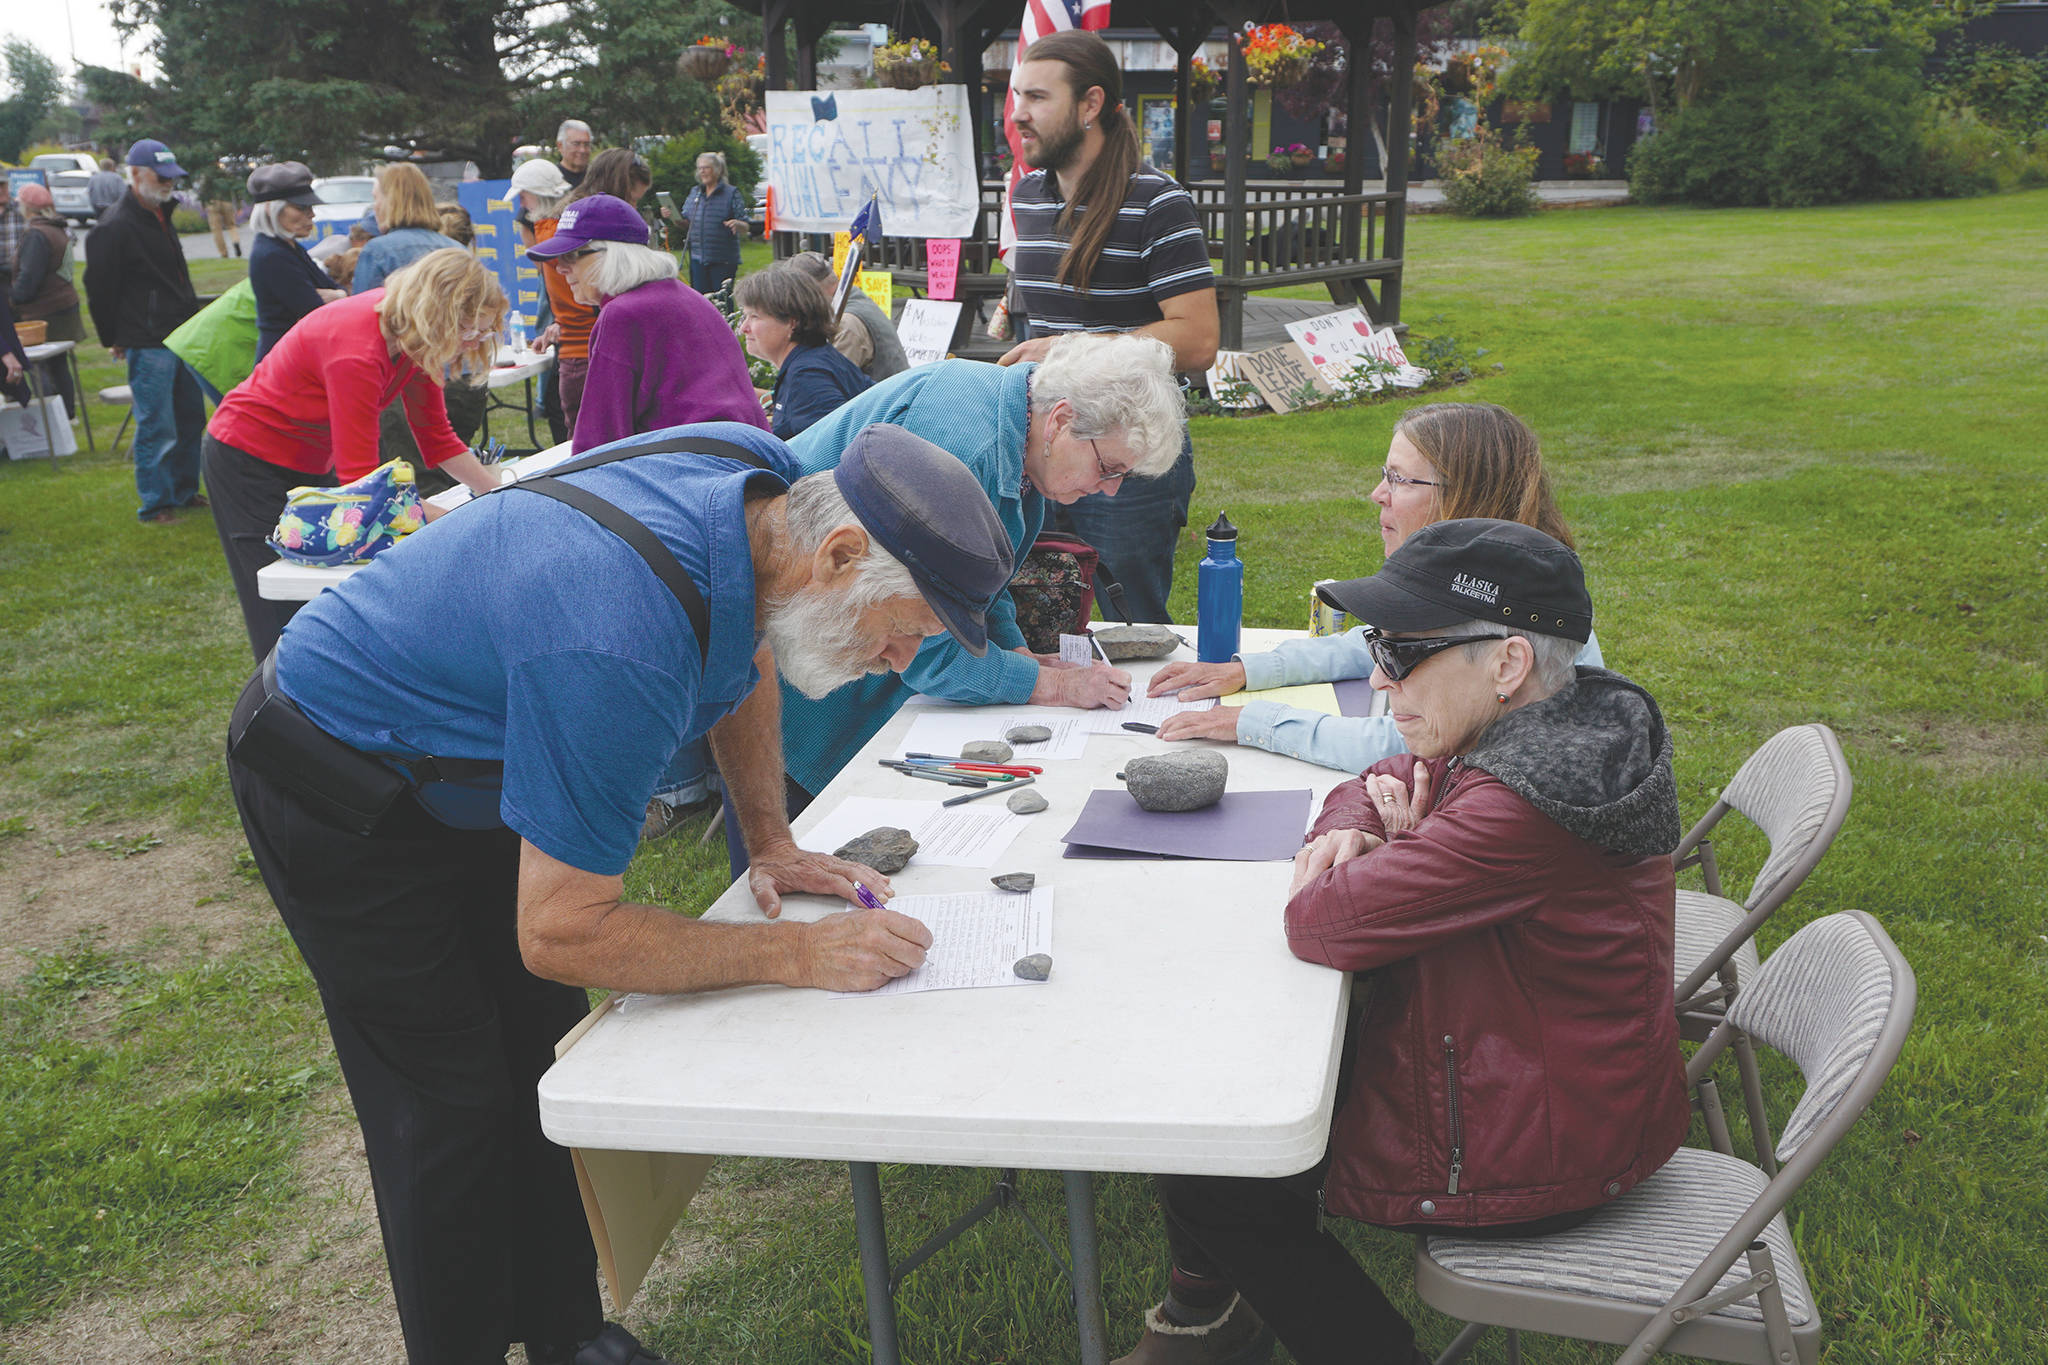 Michael Armstrong                                 Recall Dunleavy organizers Ann Keffer (right, in hat) and Pat Cue collect signatures at a Recall Dunleavy rally Aug. 1 at WKFL Park in Homer. At left, former Homer Rep. Paul Seaton, NP-Homer, signs a form.